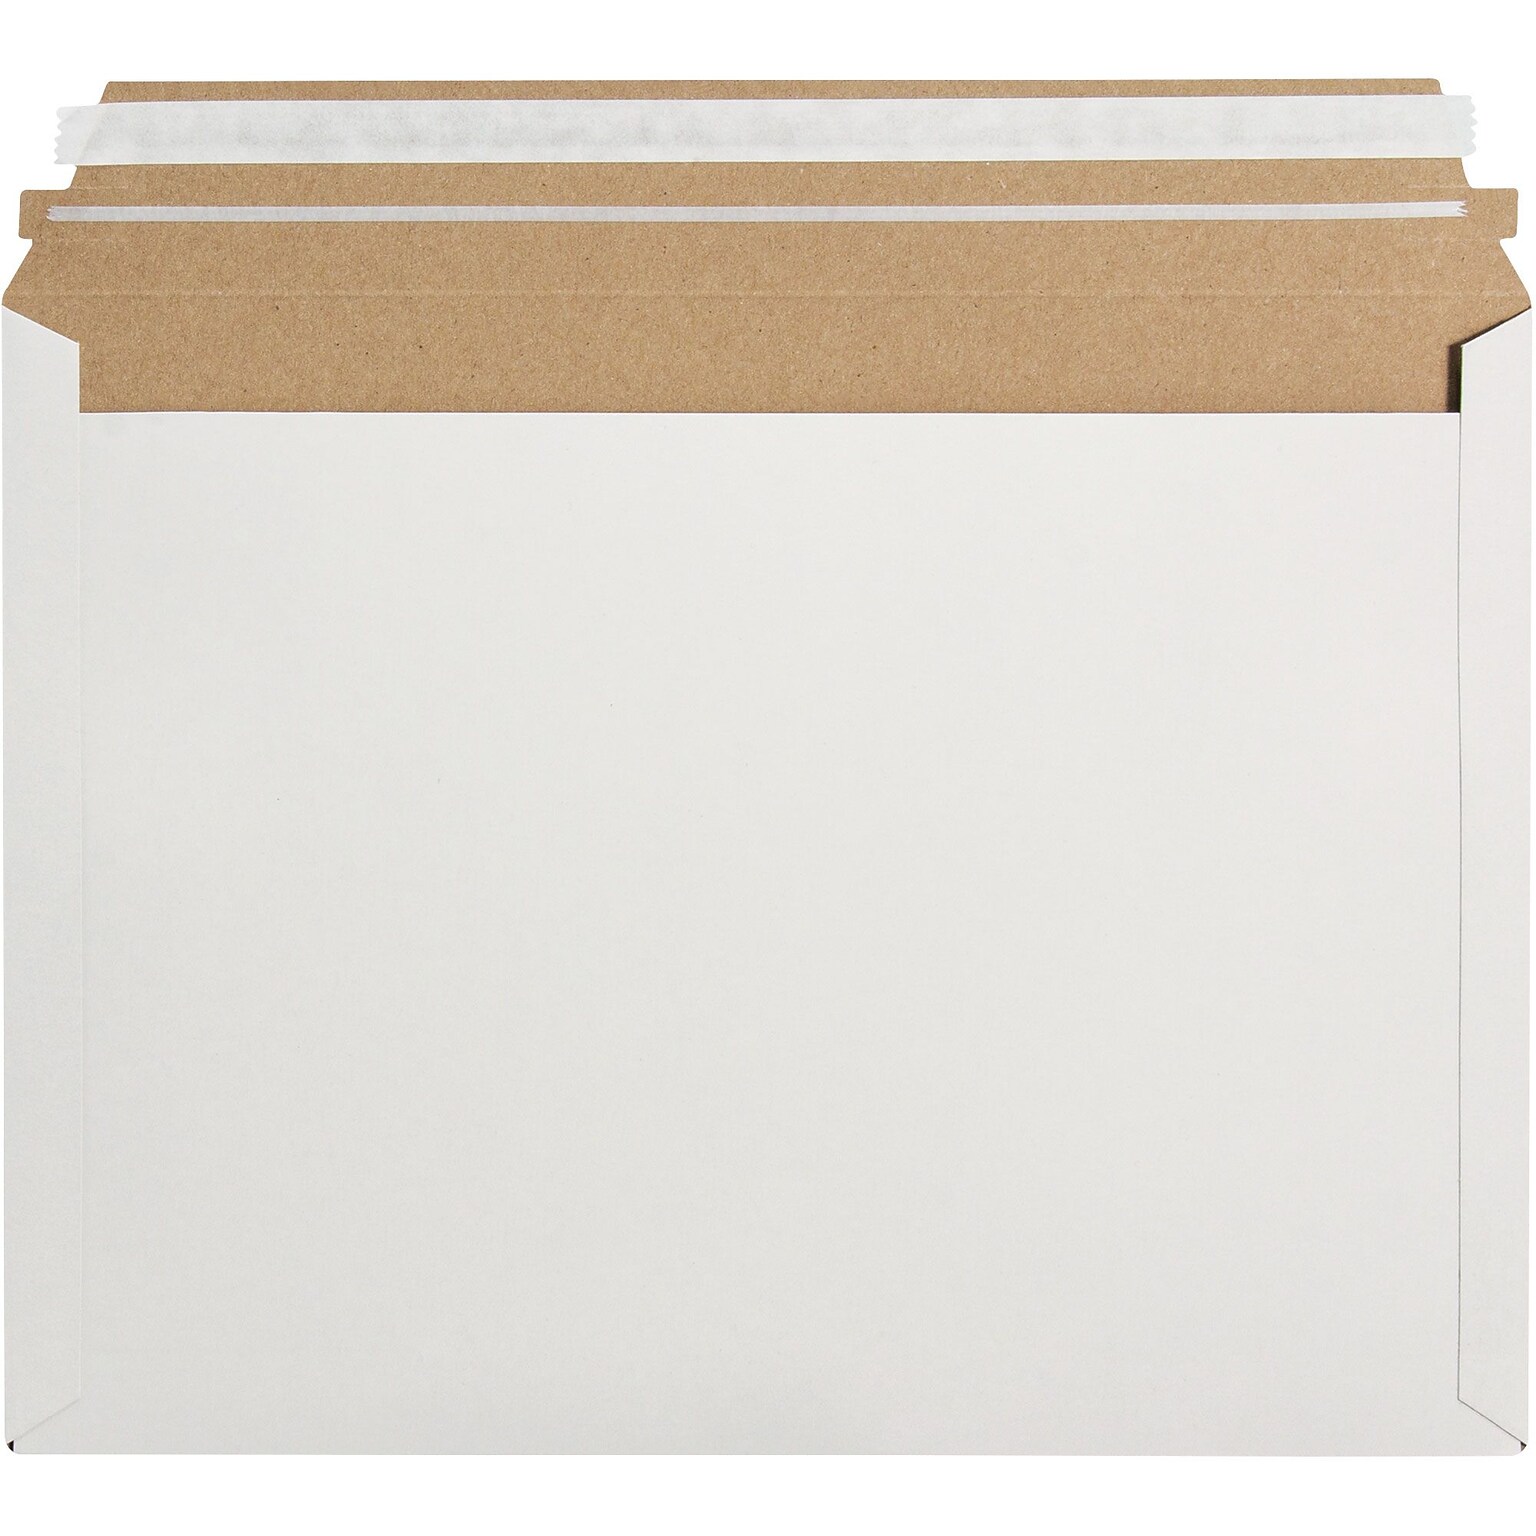 Express Pouch Mailer, 12 1/2 x 9 1/2, White, 250/Case (RM1EP)